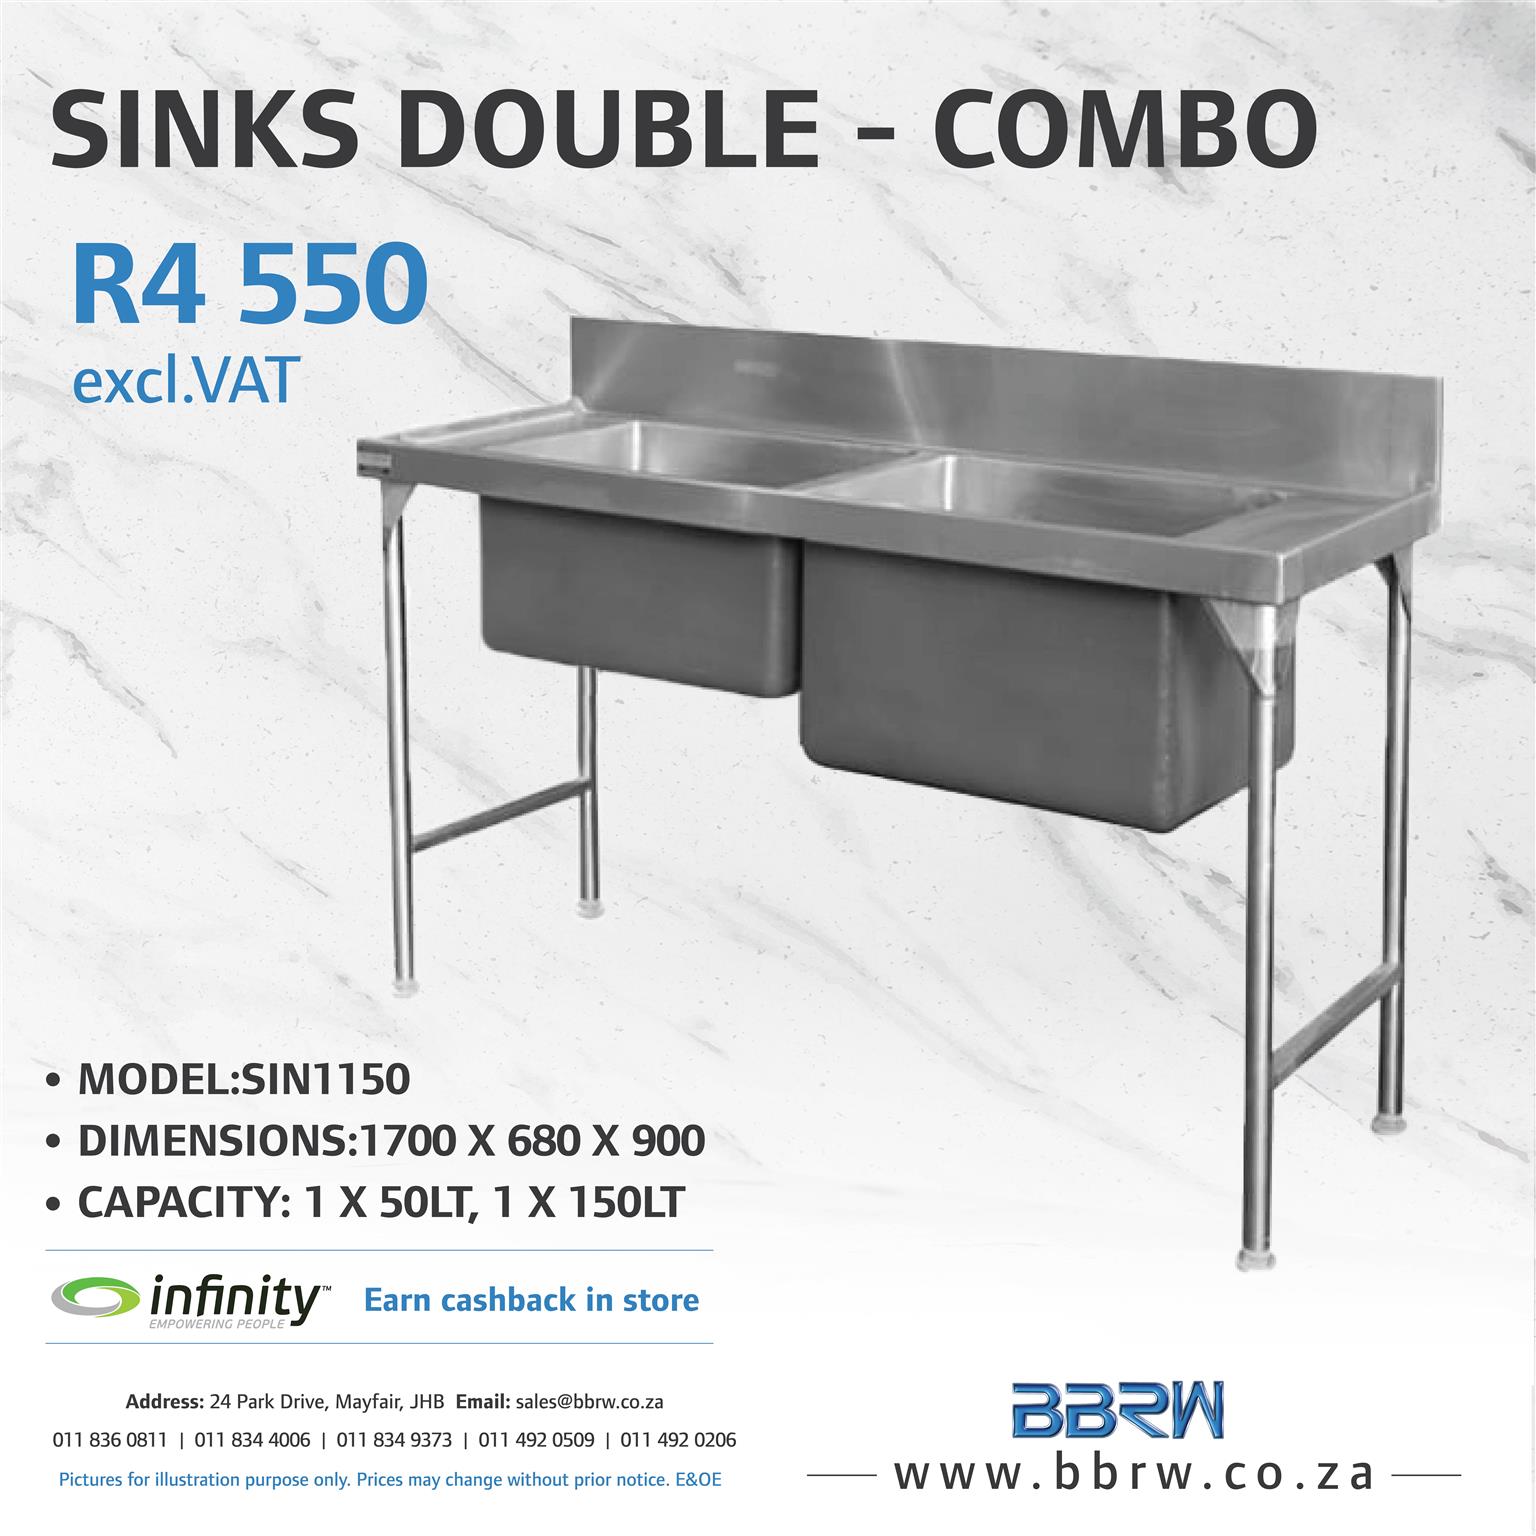 BBRW SPECIAL - Double Sink Combo